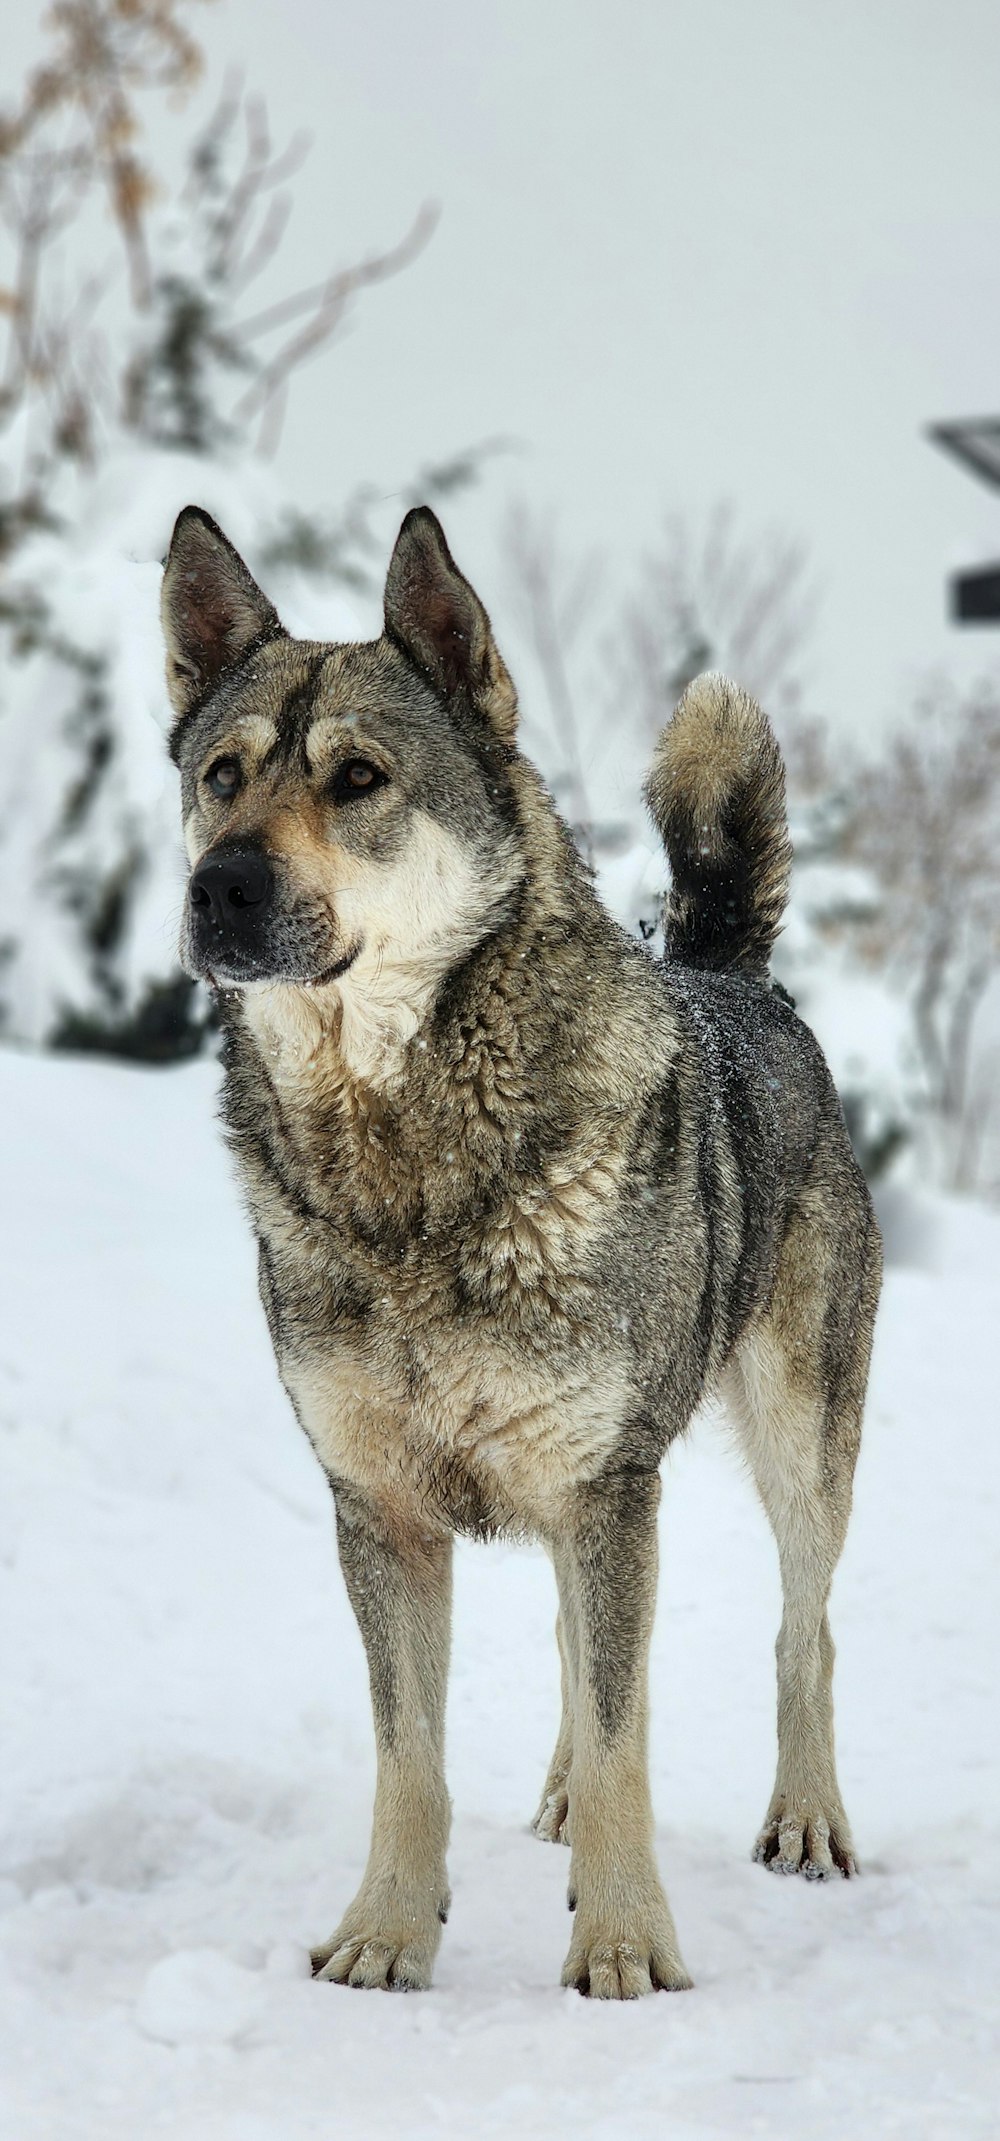 a large gray dog standing in the snow